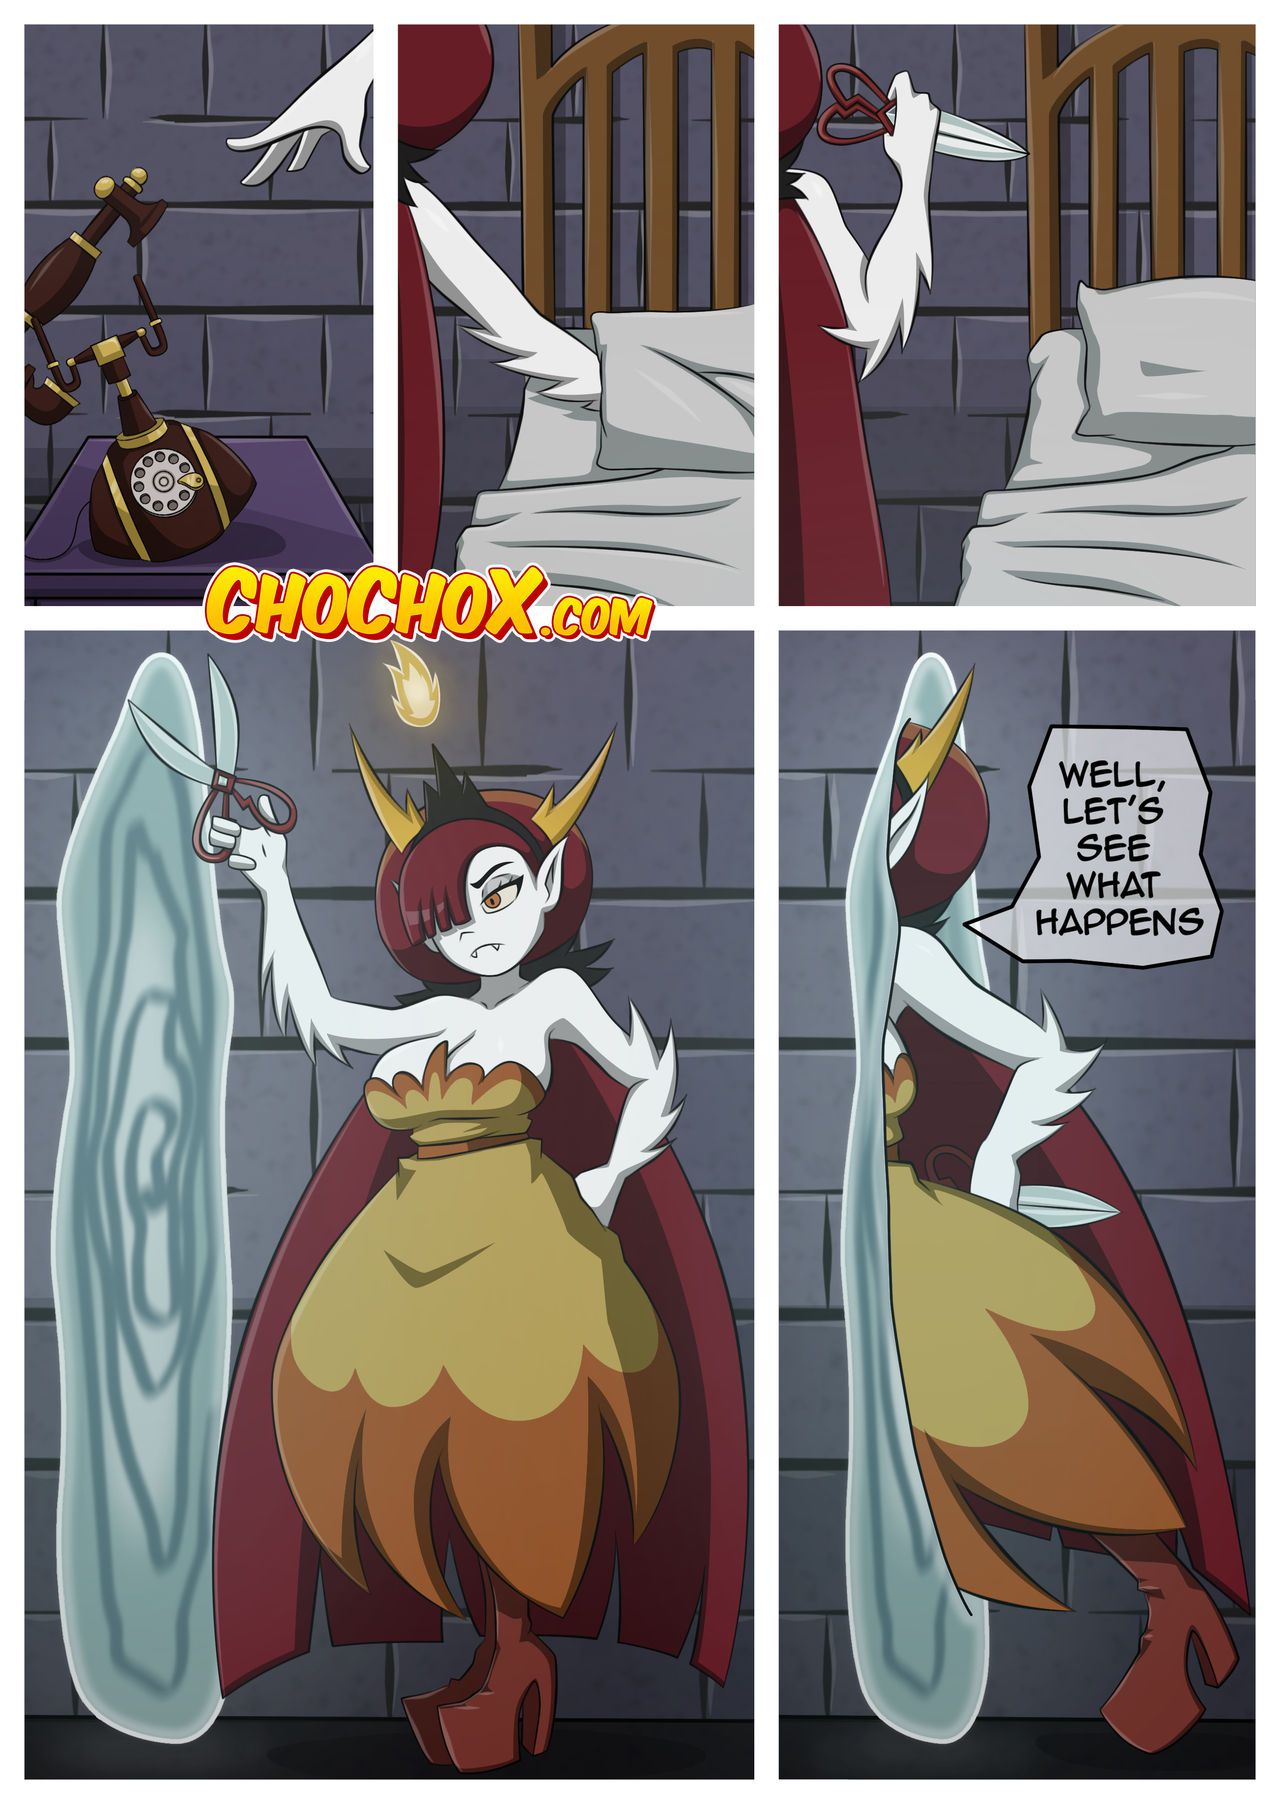 [Crock Comix] Hekapoo Plan’s - Sexberty 1 [ChoChoX] (Star Vs. The Forces of Evil) 5